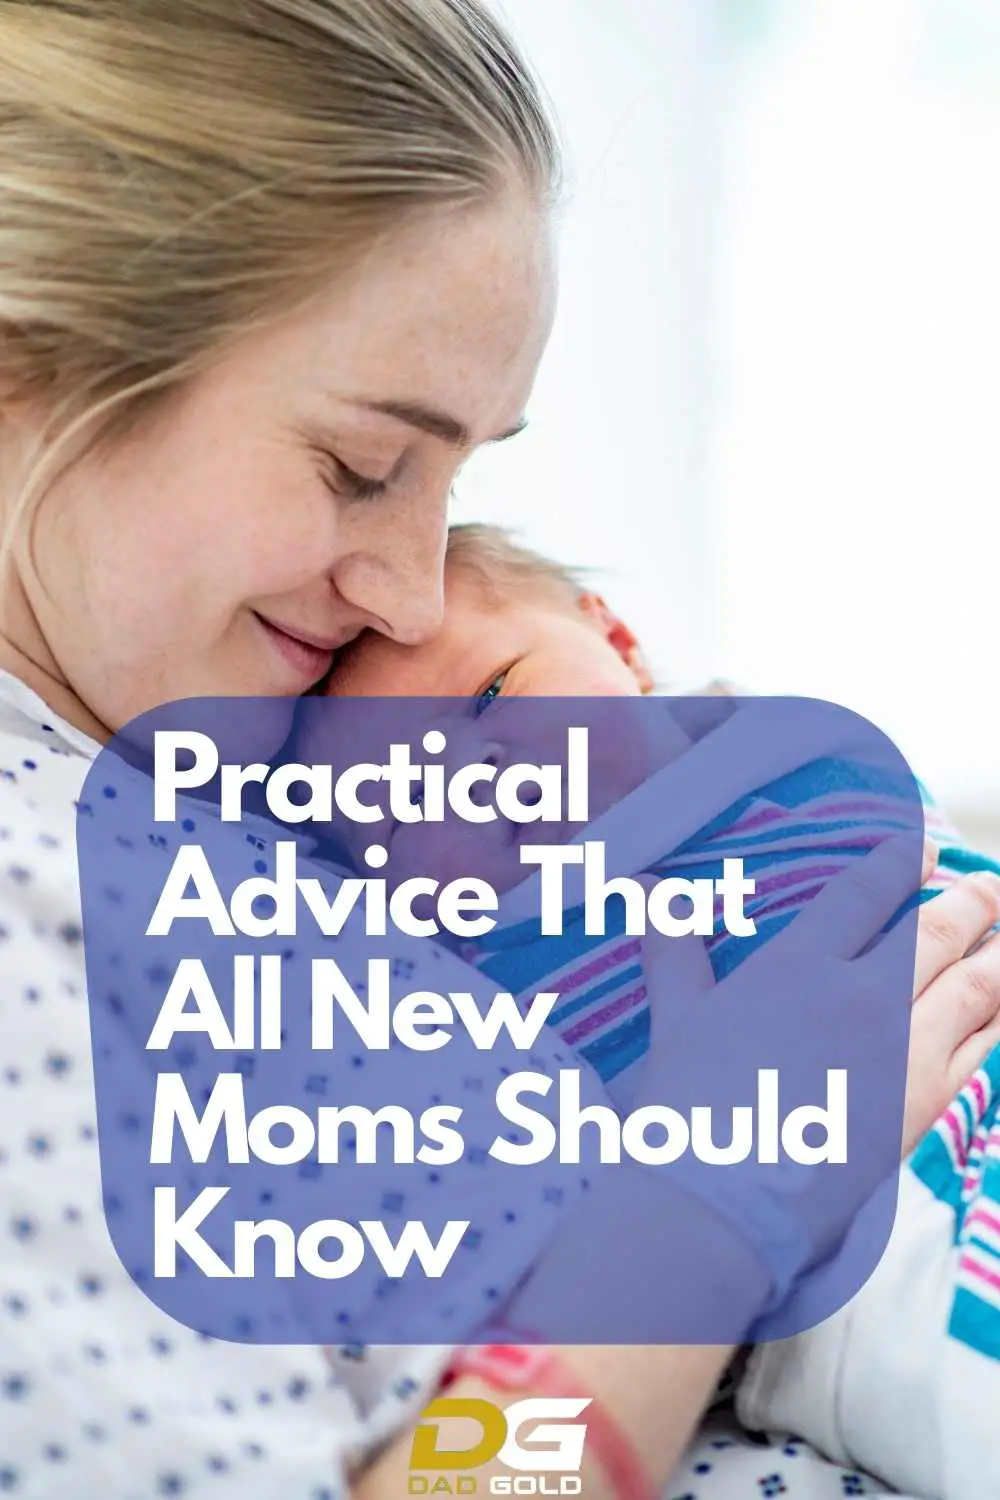 Practical Advice That All New Moms Should Know